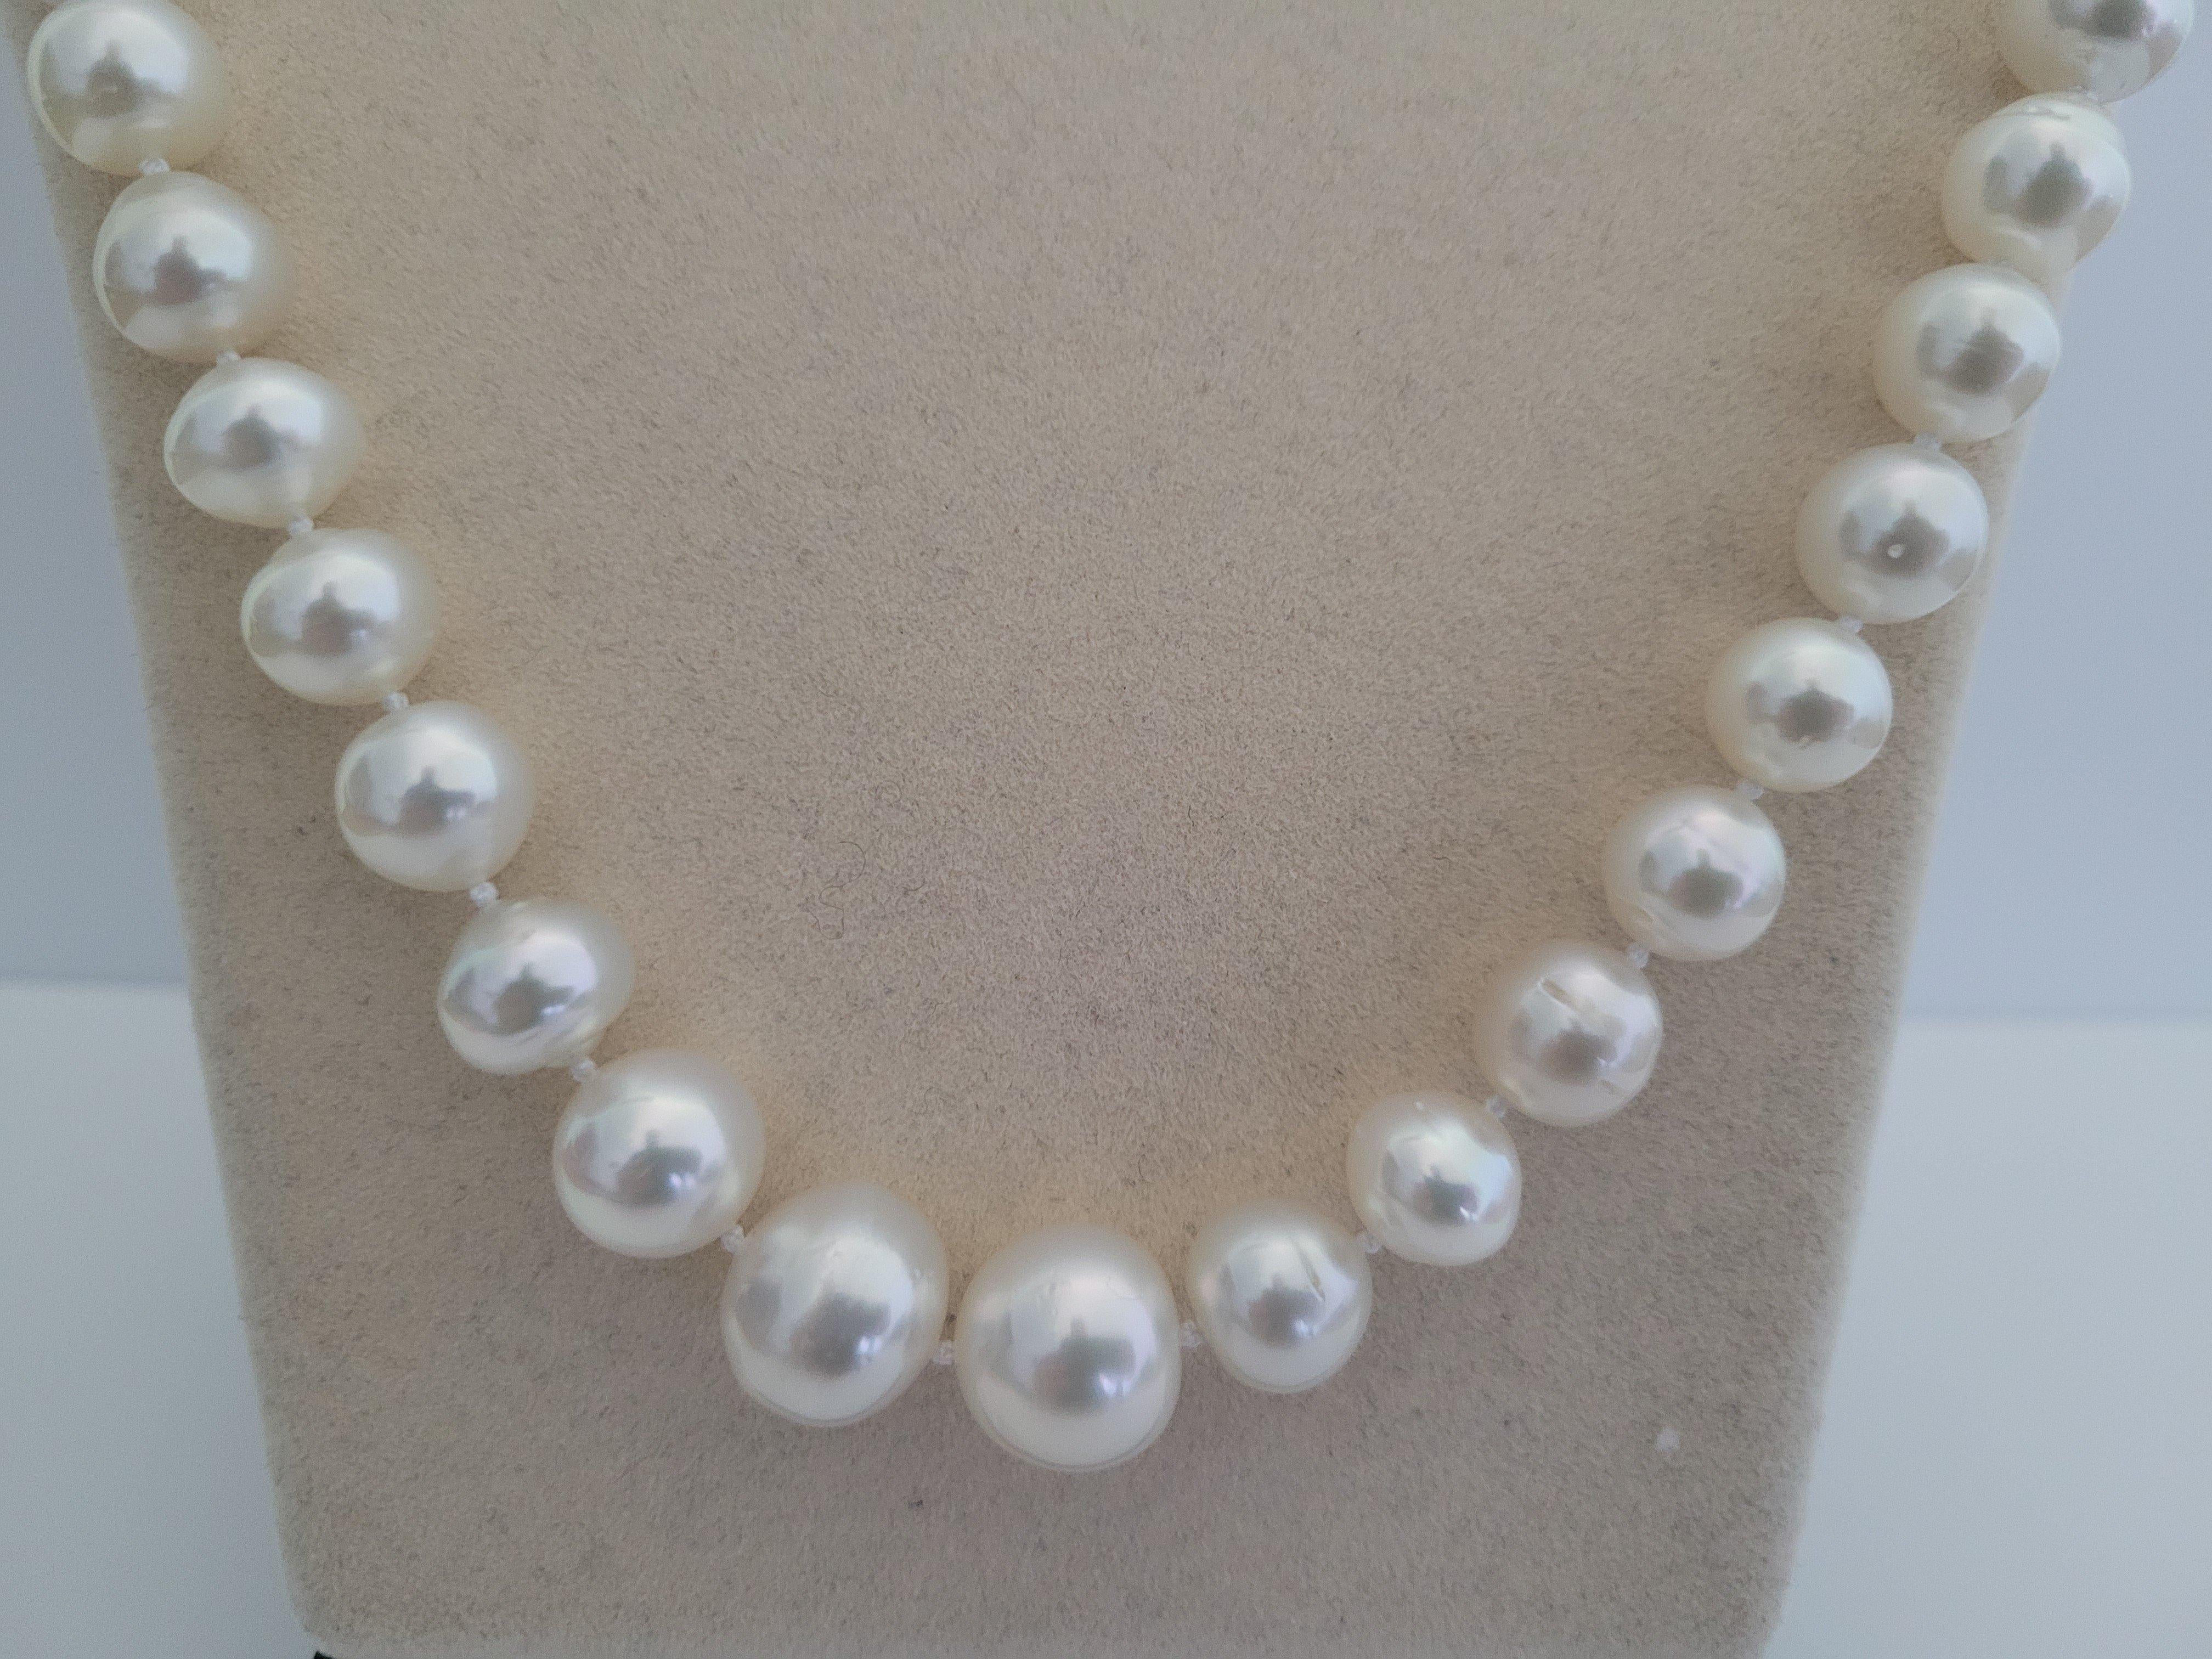  

A Natural Colors South Sea Pearls Necklace

Origin, the Pinctada Maxima Oyster, and Australian Ocean Waters 

- 45 pcs pearls in the necklace

- Size of Pearls from 9-14 mm

- Natural White Color 

- Natural High Luster

- The skin  and surface